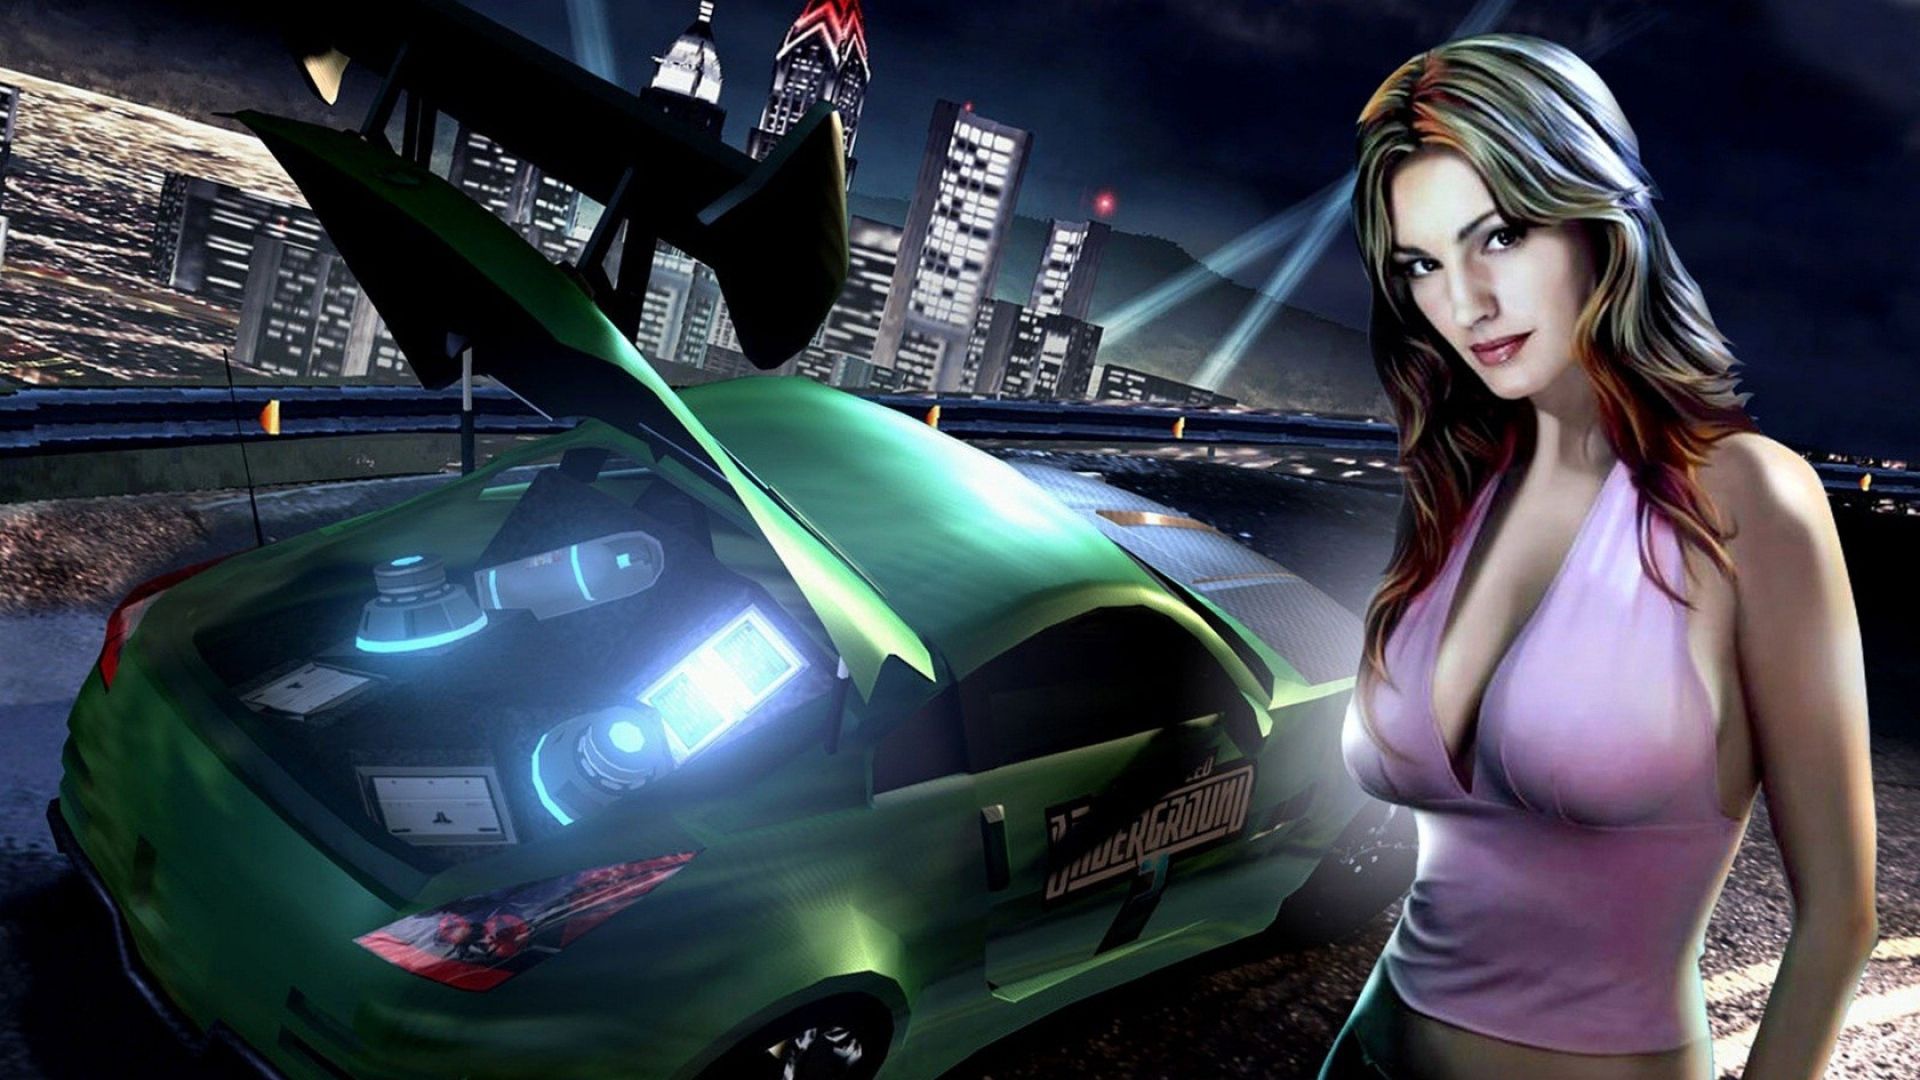 Download Wallpaper 1920x1080 nfs, need for speed, girl, sunset, city Full HD 1080p HD Background